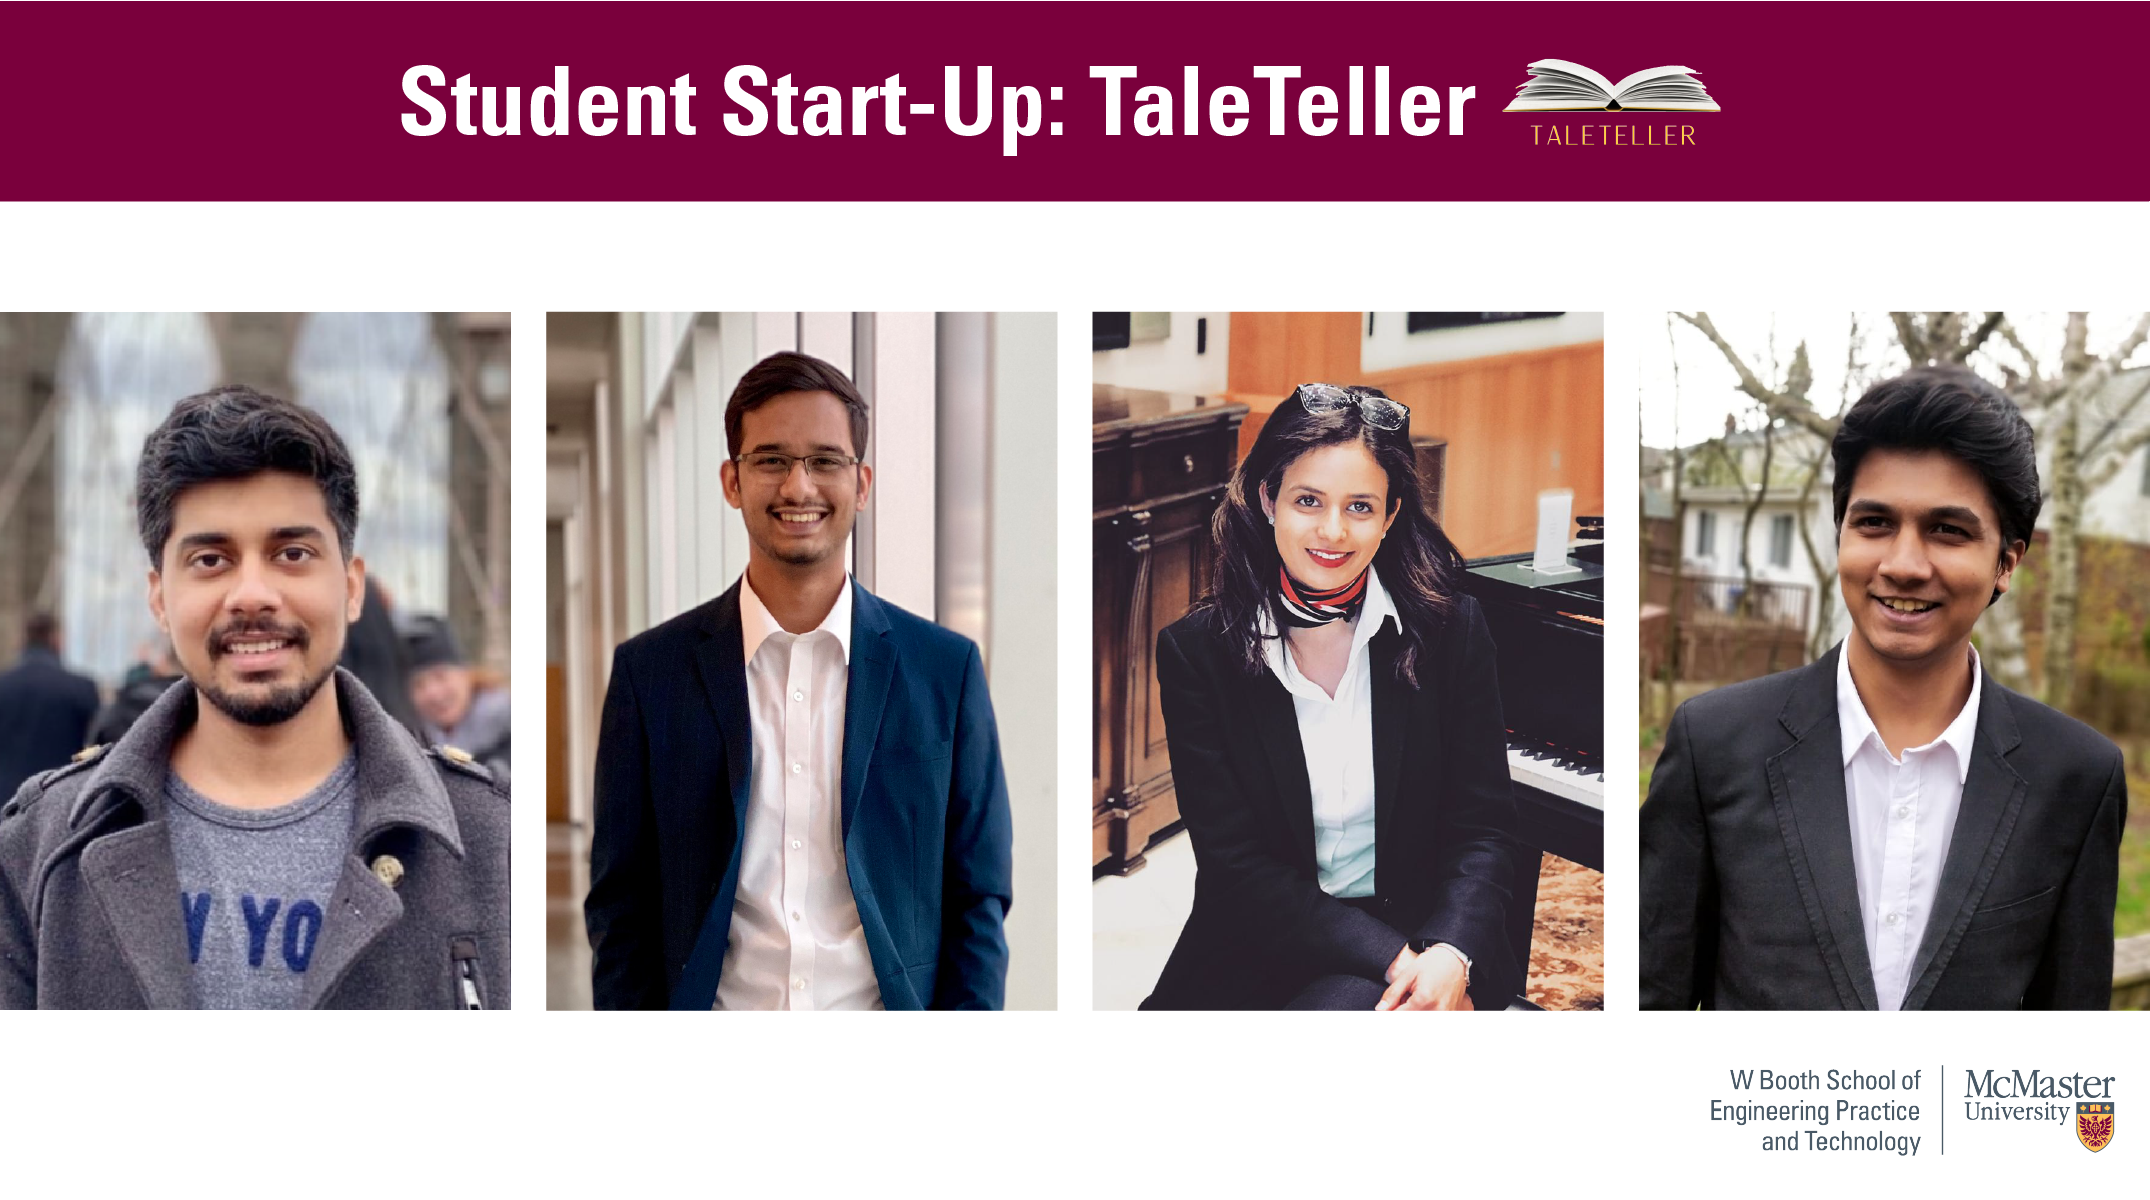 Student startup TaleTeller aims to connect families through their stories